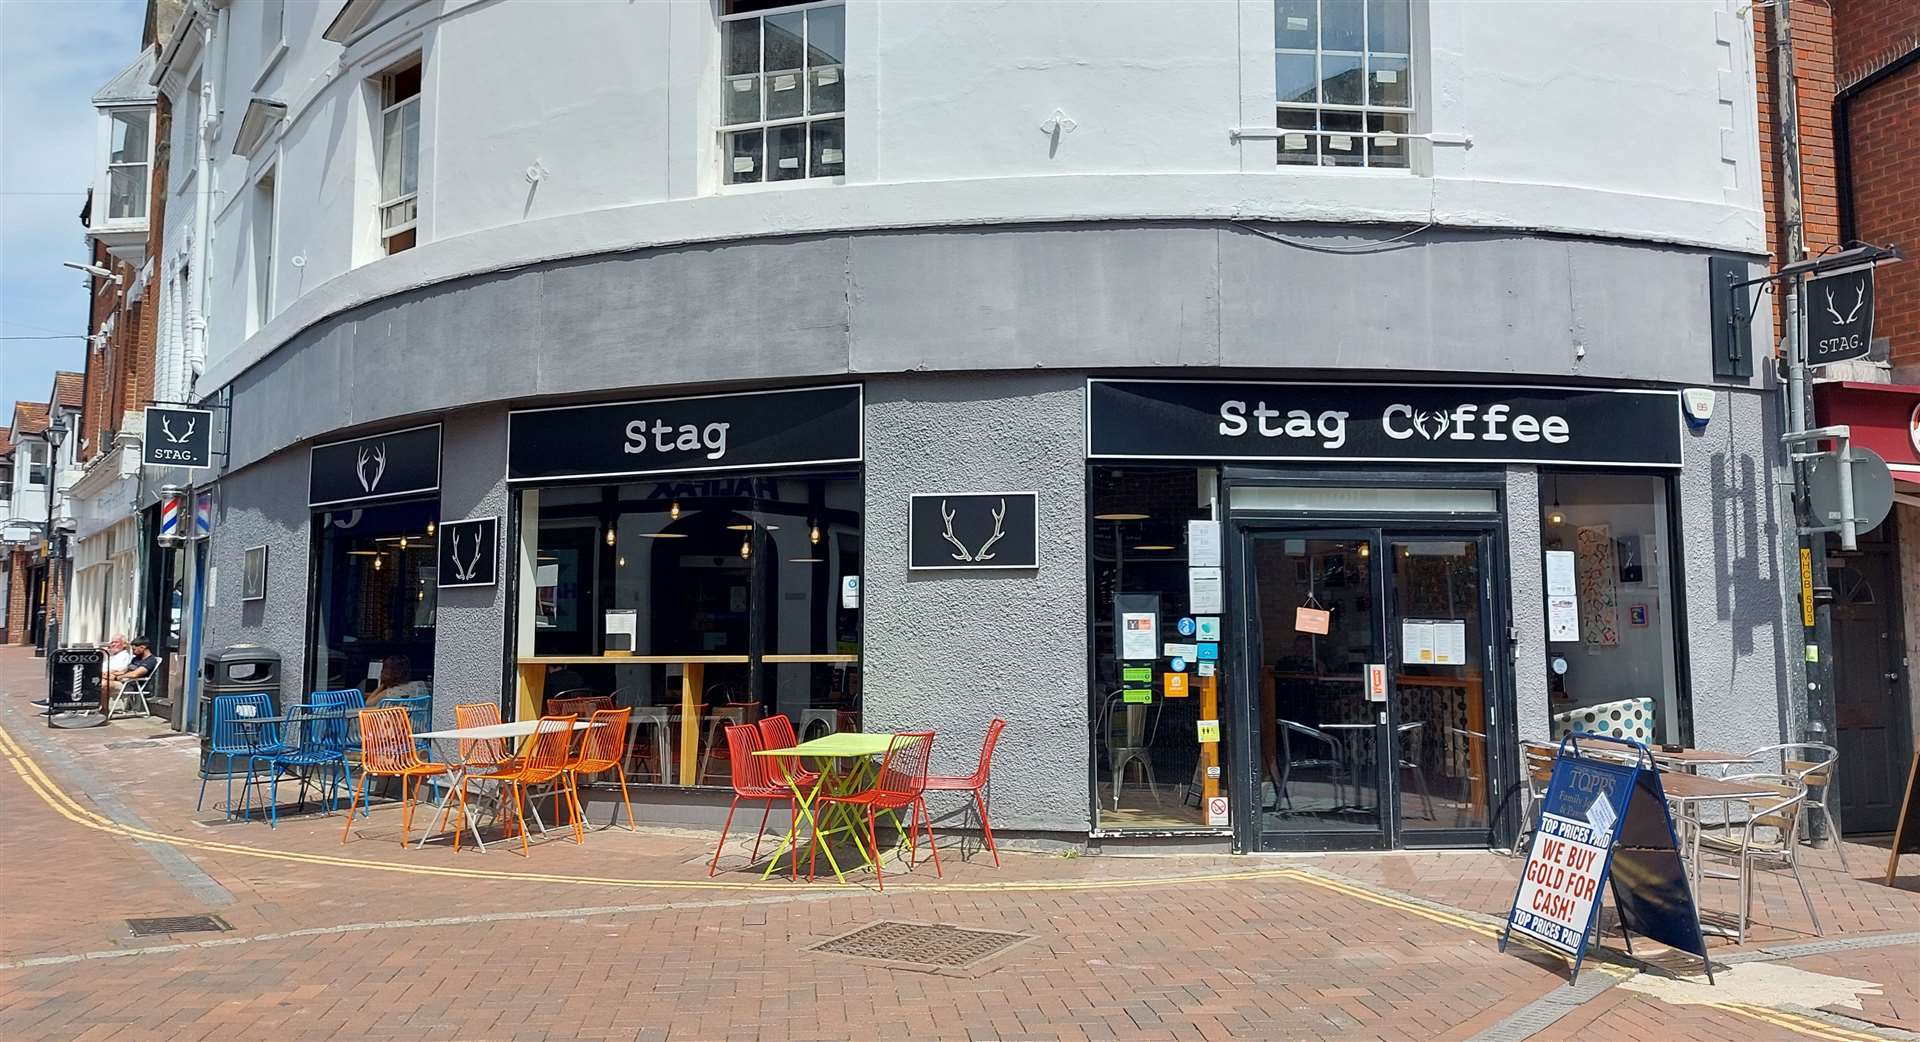 Stag Coffee in Ashford high street will become Wonder Coffee and Tiluck's